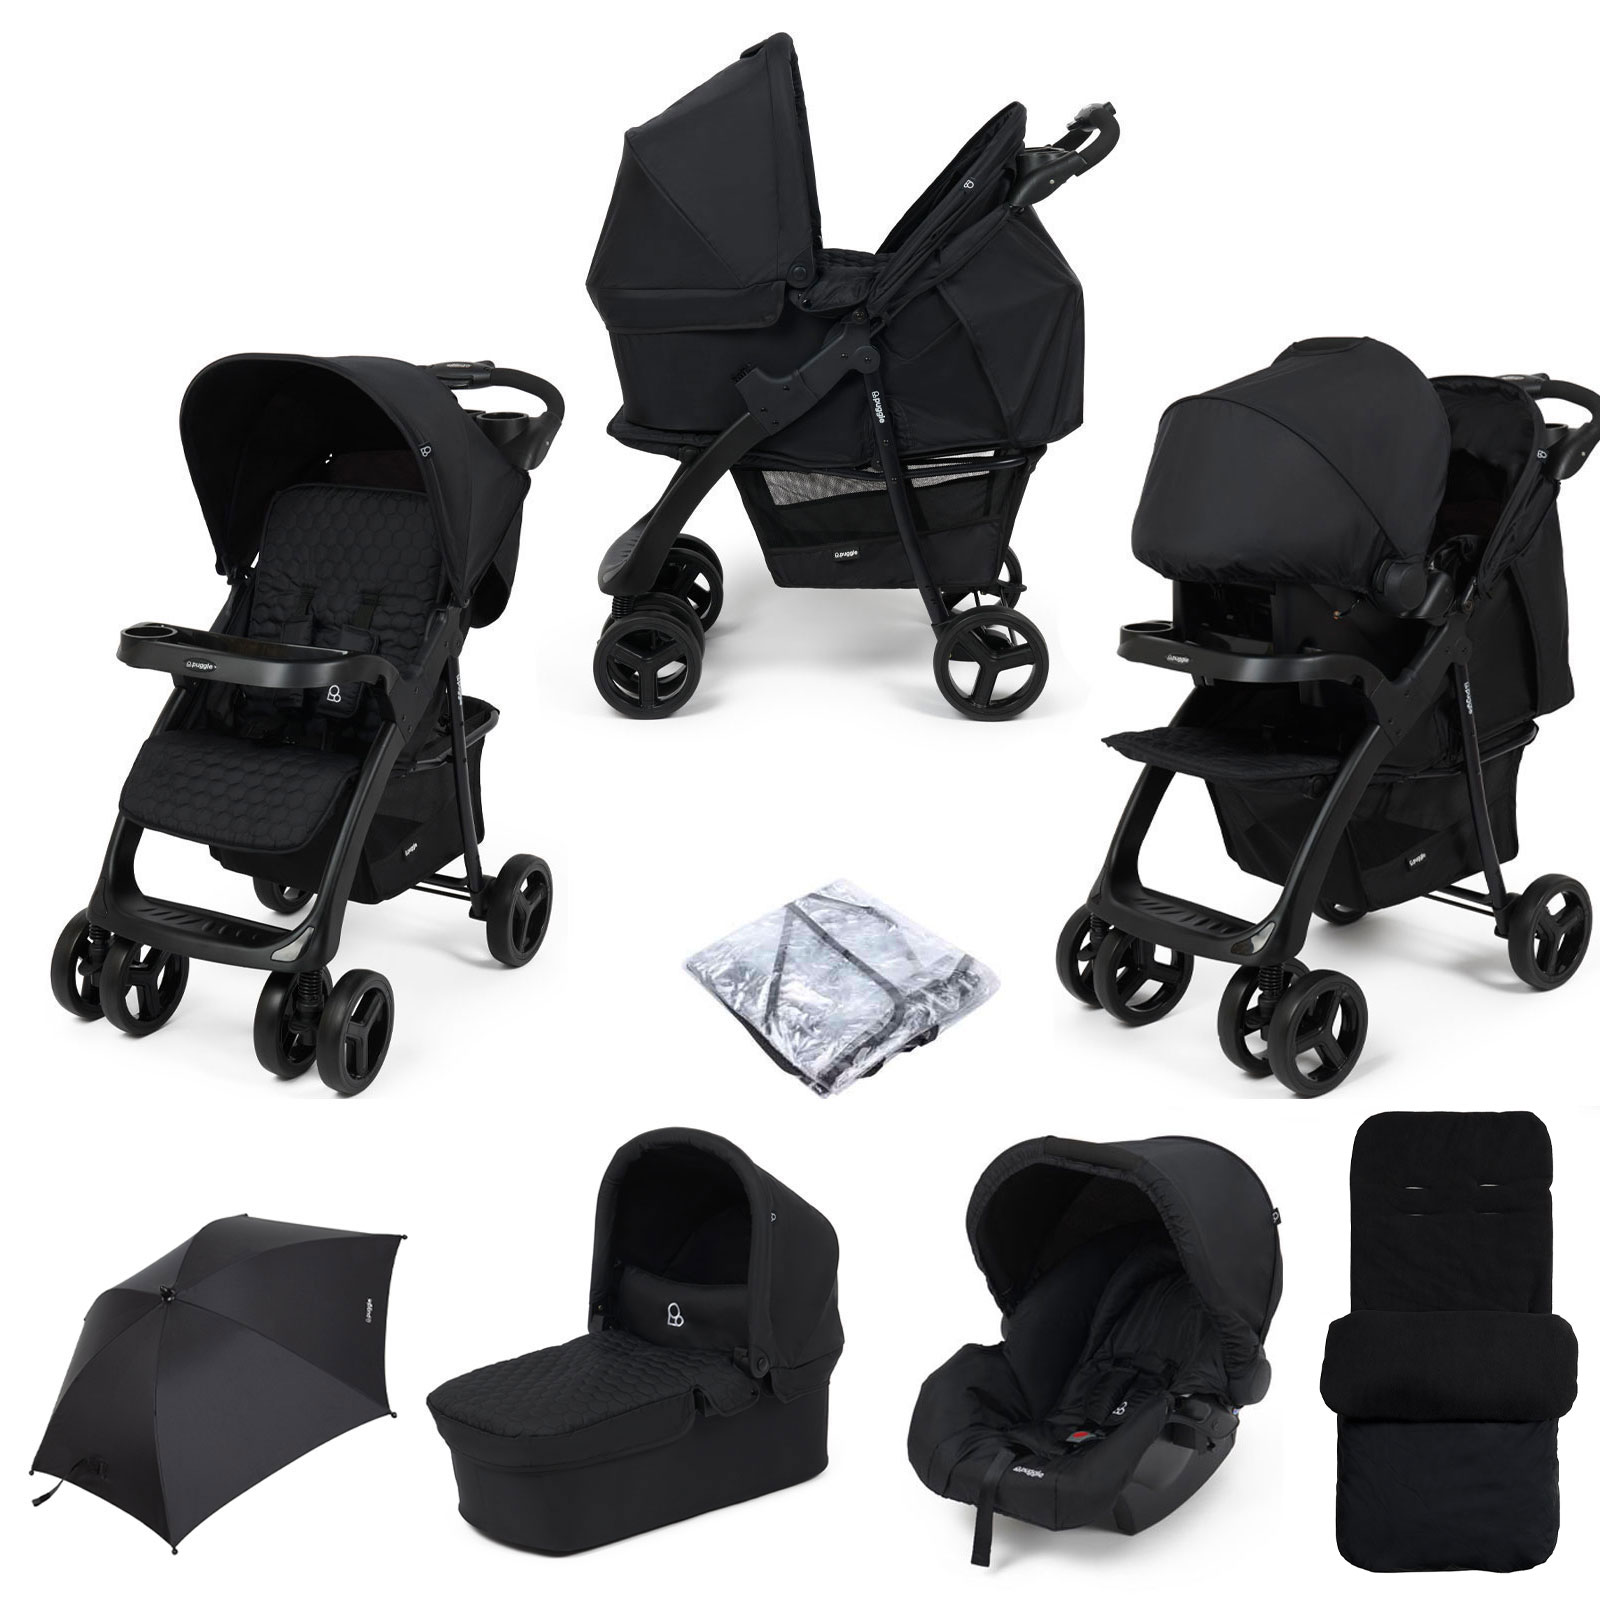 Puggle Denver Luxe 3in1 Travel System with Raincover, Deluxe Footmuff & Parasol - Storm Black